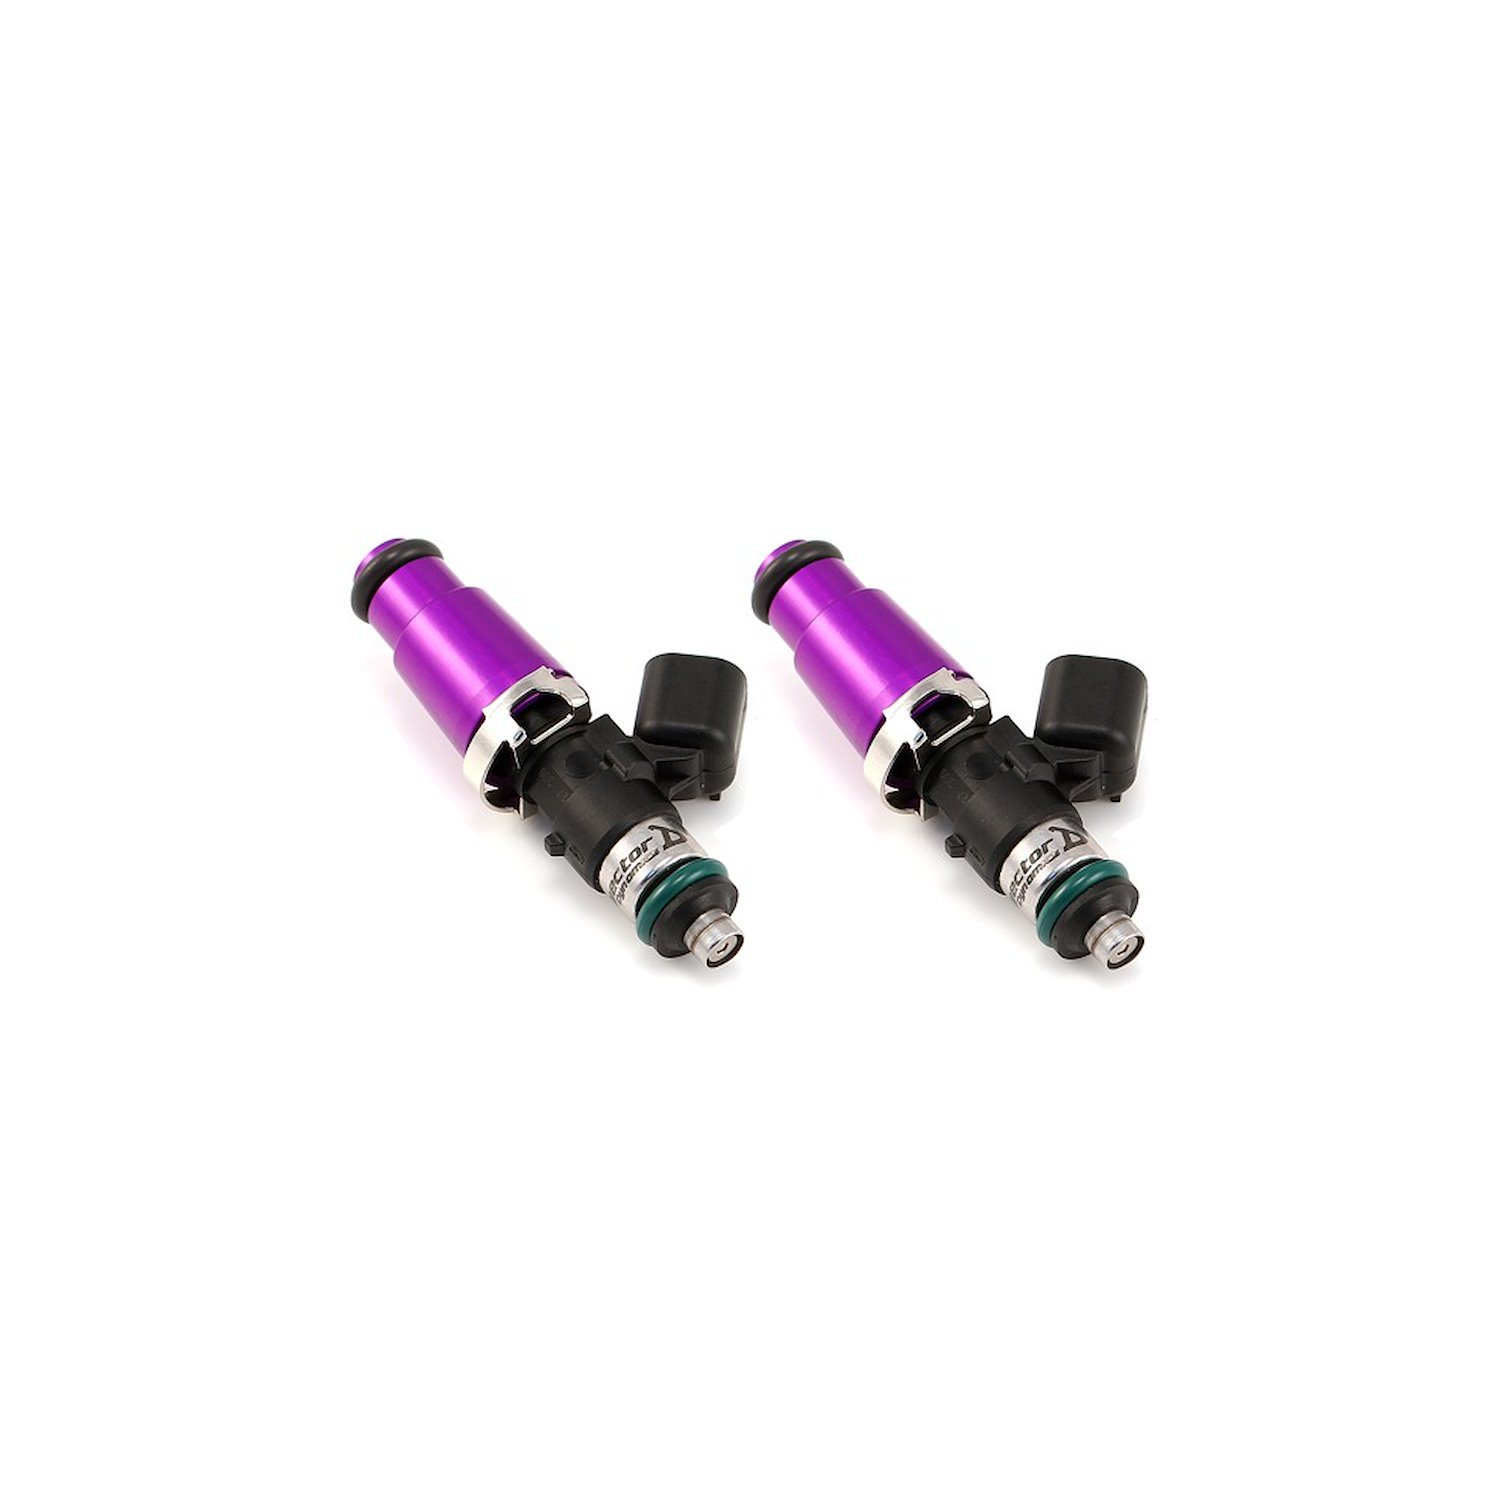 2600.11.06.60.14.2 2600cc Fuel Injector Set, 1979-1986 RX-7, 14 mm Top, 204 / 14 mm Lower O-Ring